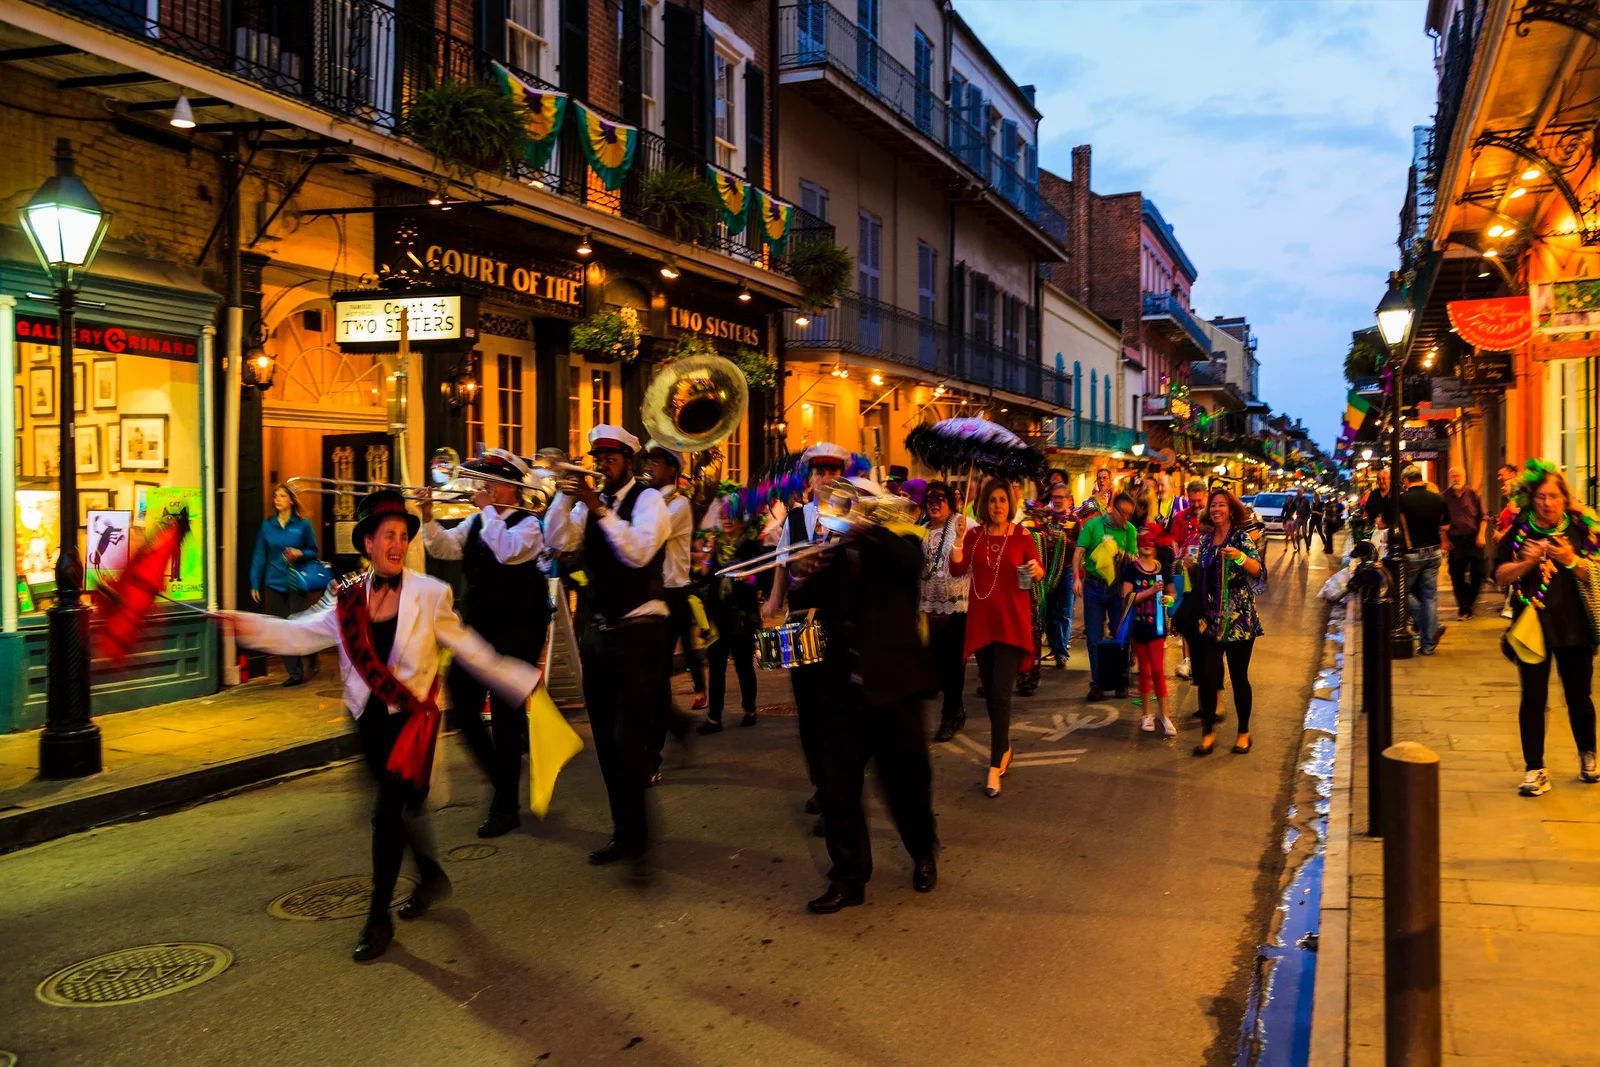 New Orleans, LA/USA  Jan 12, 2019: Marching band and many  people playing music and dancing at French Quarter, New Orleans, Louisiana